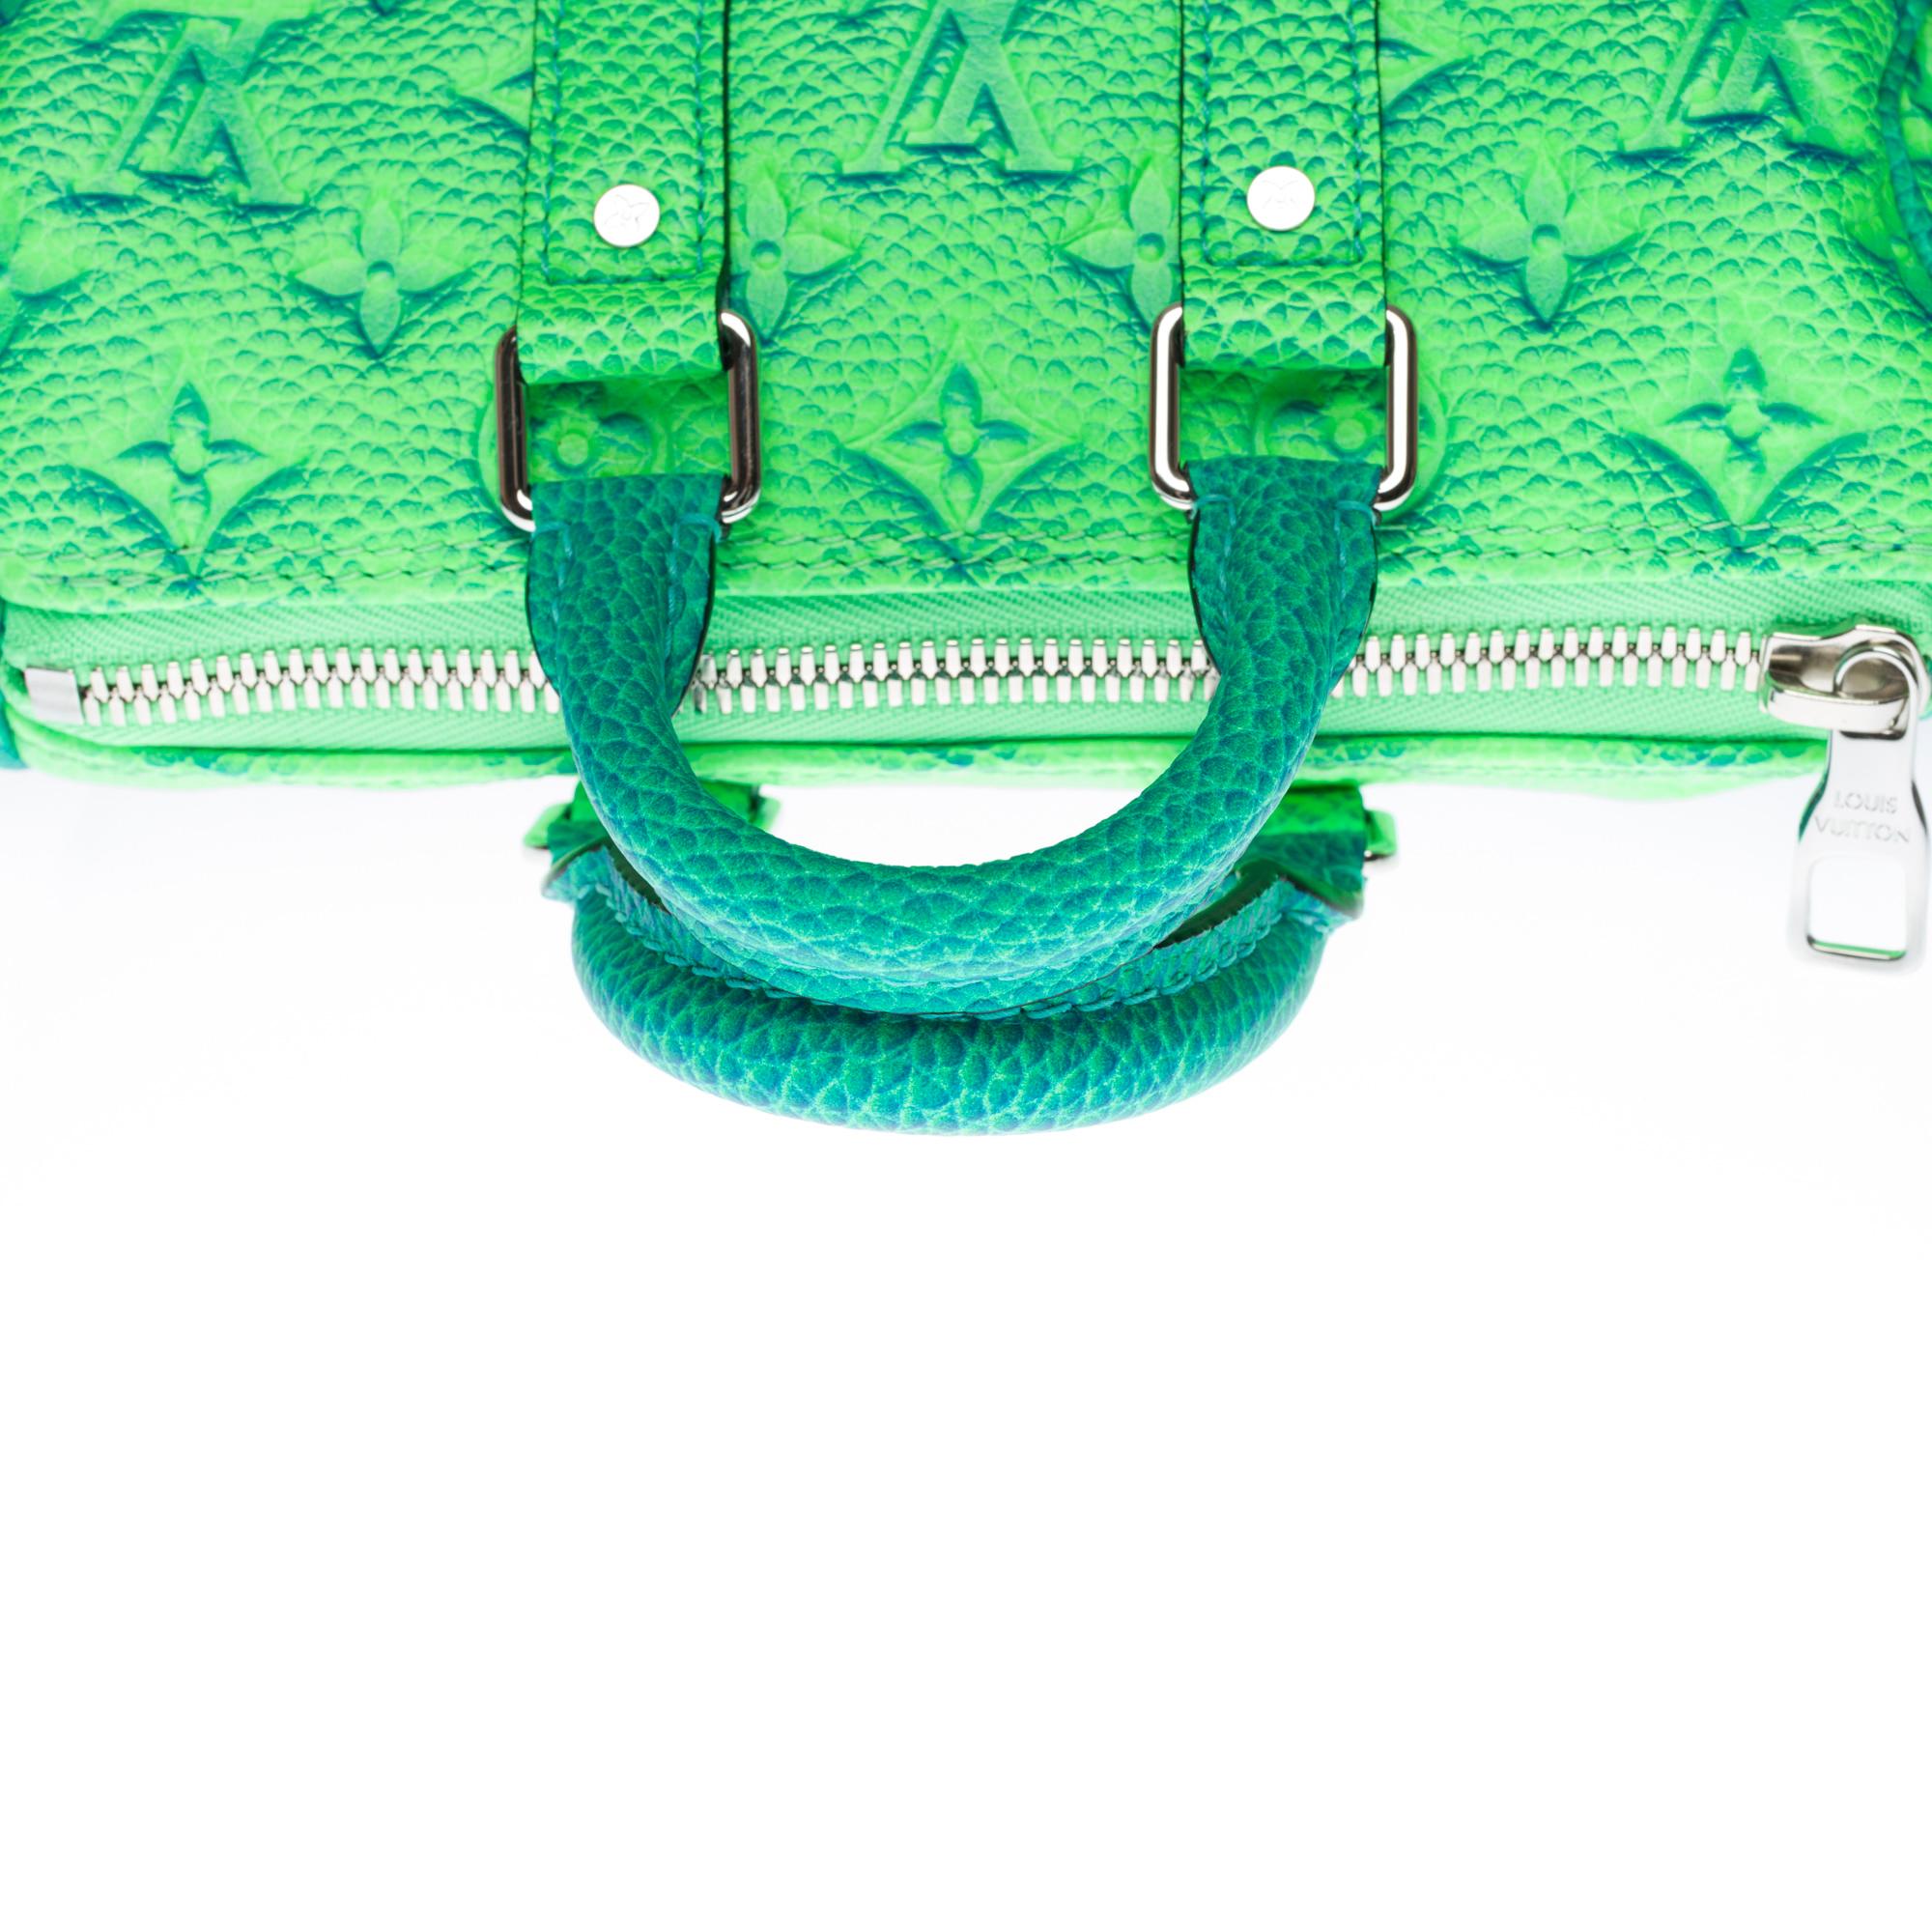 NEW-Louis Vuitton keepall XS strap Travel bag Spray in green leather / V. Abloh 2